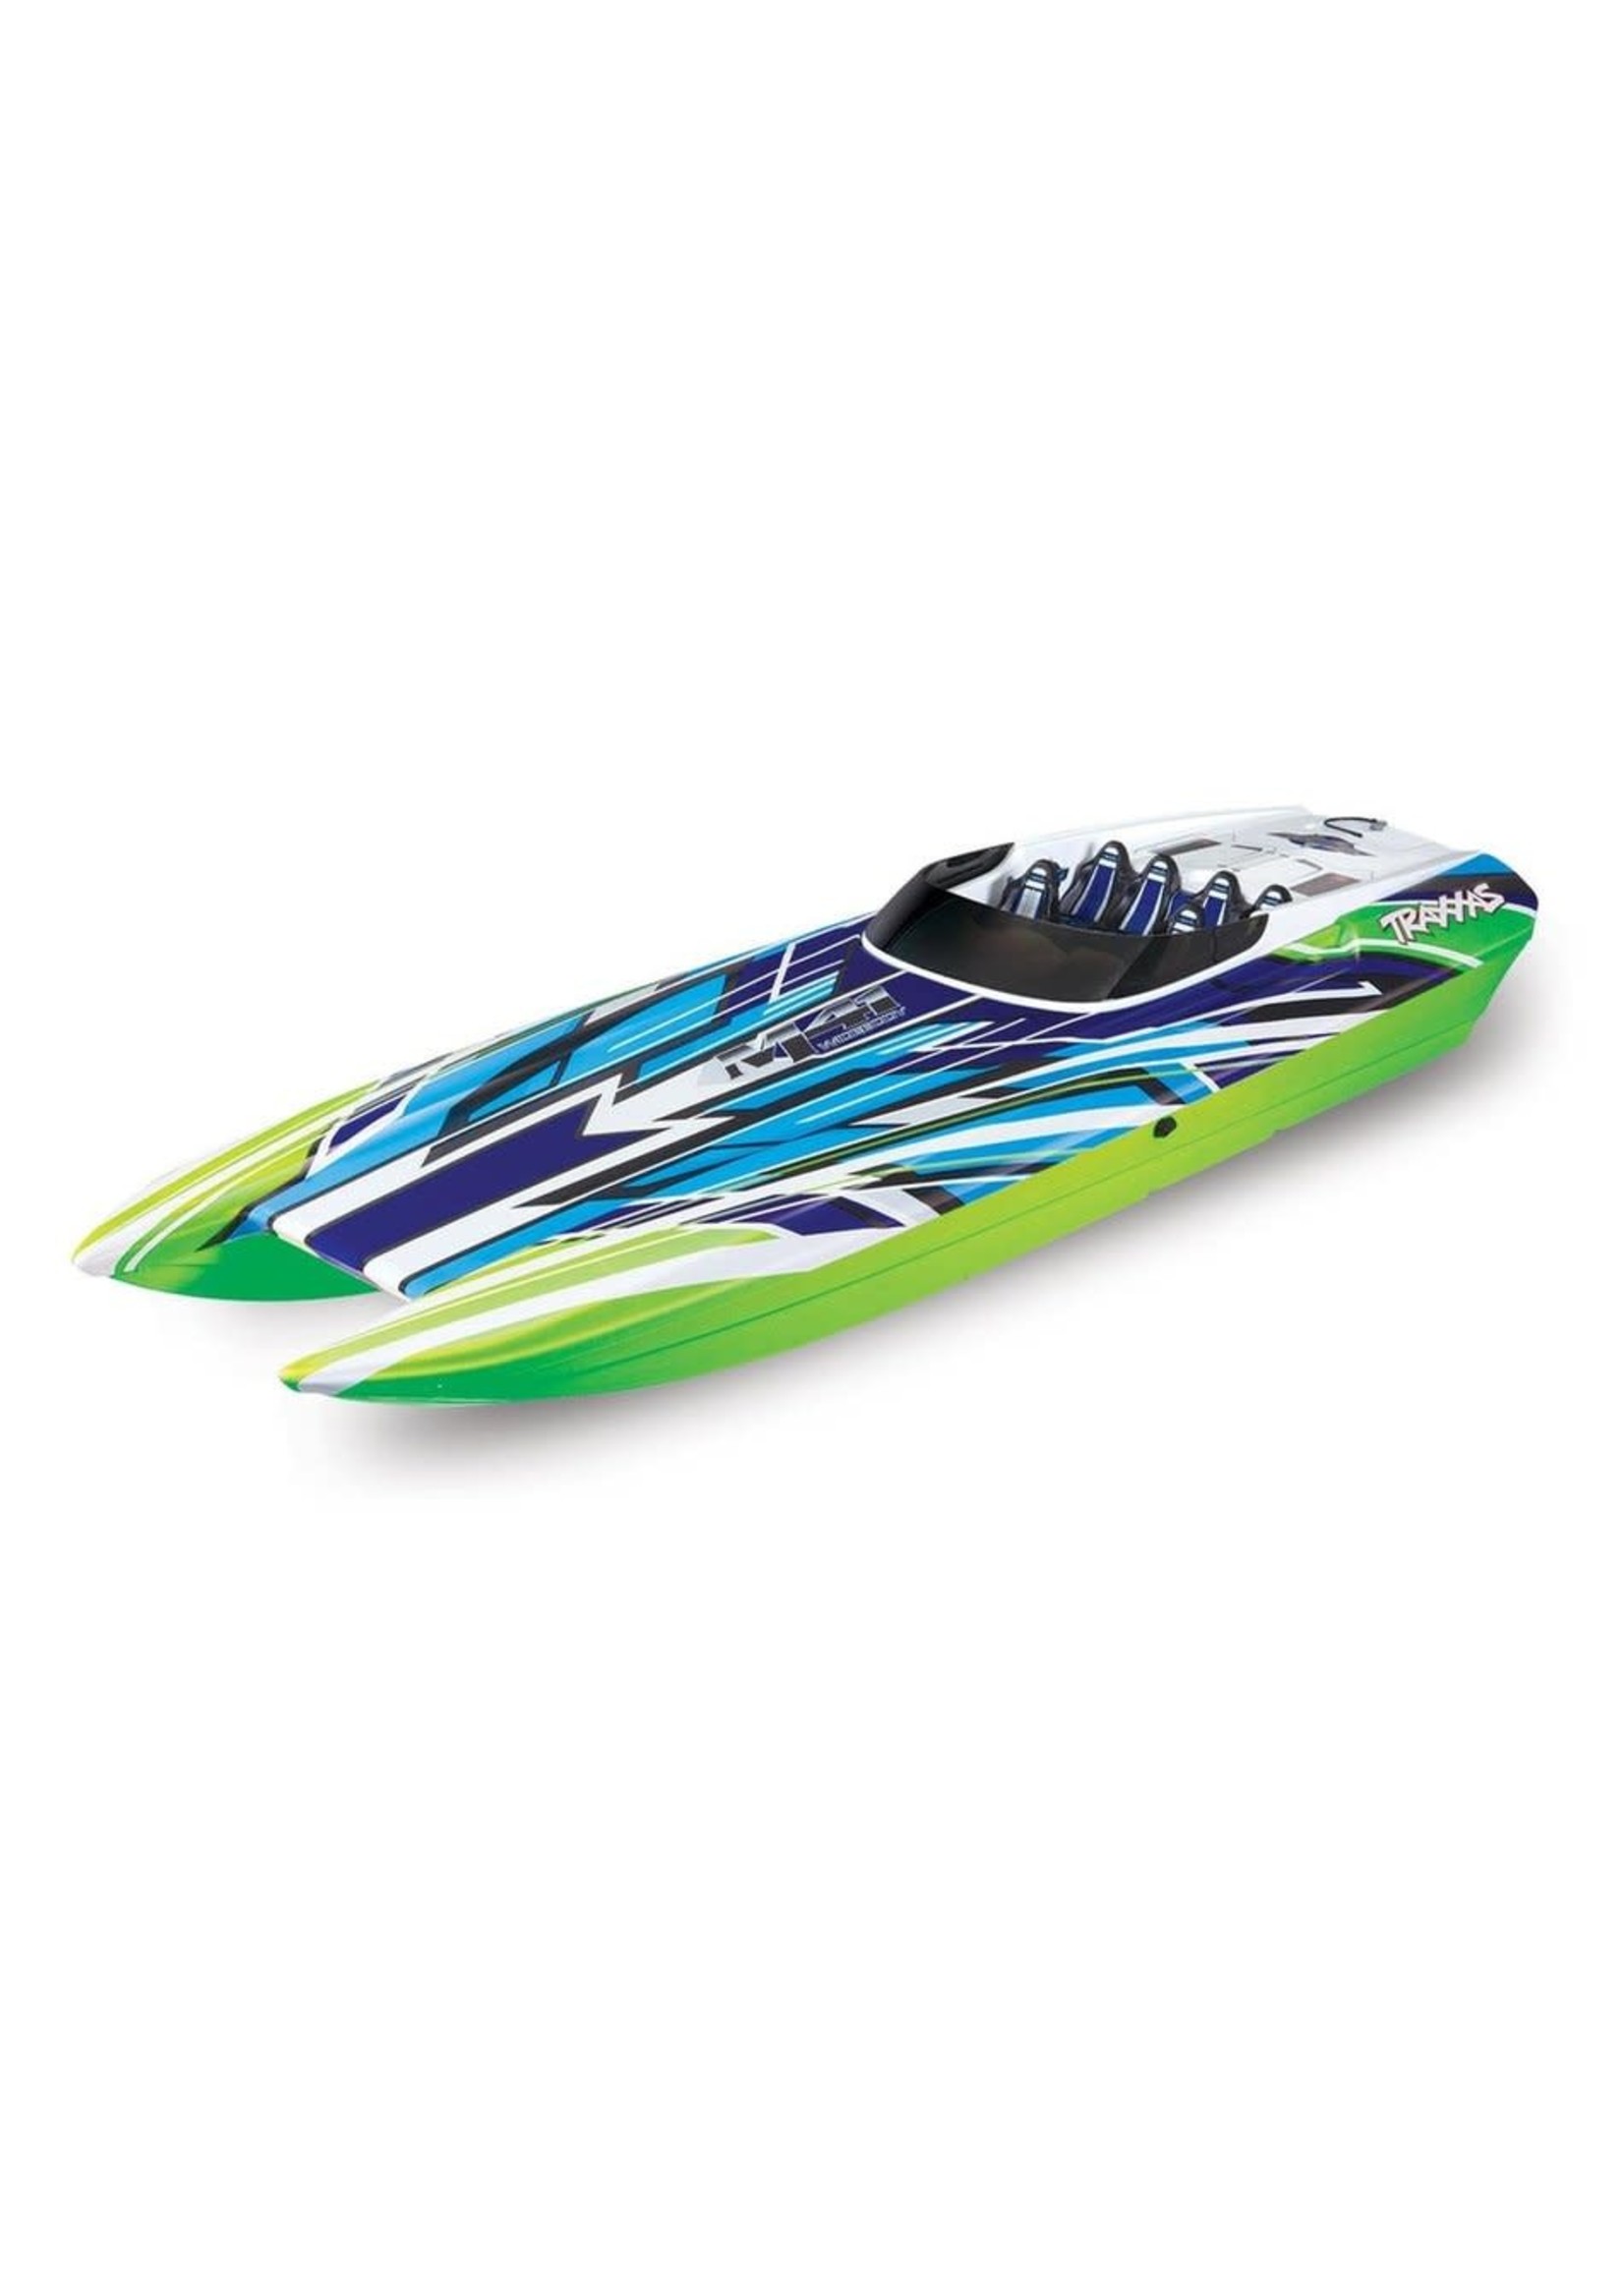 Traxxas 57046-4-GRNX DCB M41 Widebody: Brushless 40' Race Boat with TQi Traxxas Link  Enabled 2.4GHz Radio System & Traxxas Stability Management (TSM)